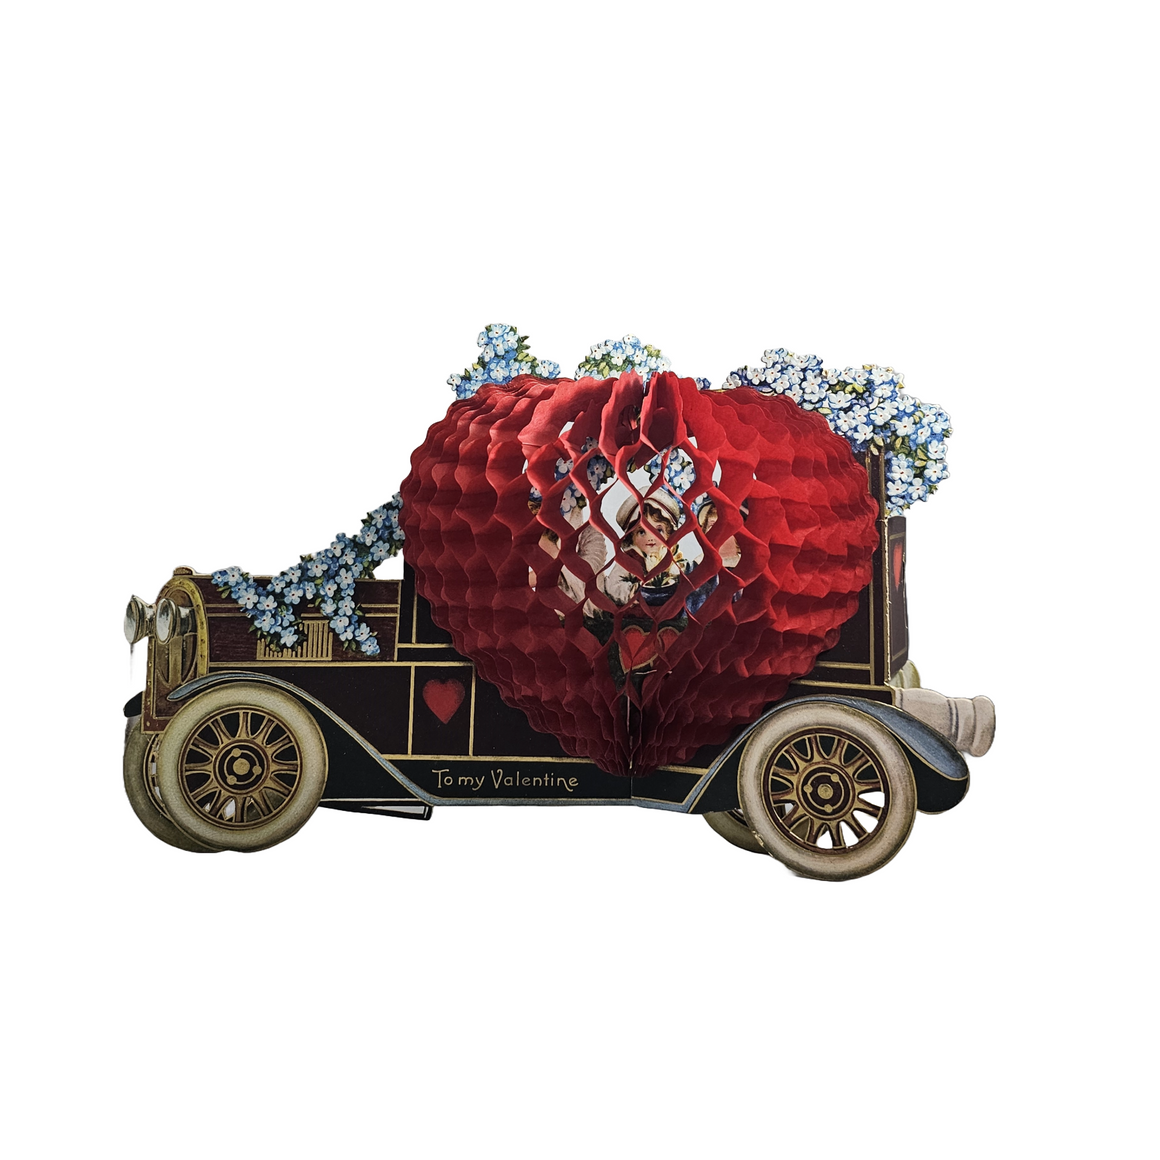 Large Vintage 1920s Die Cut 3D Honeycomb Heart Valentine Card Cupid Driving Old Timey Car with Children